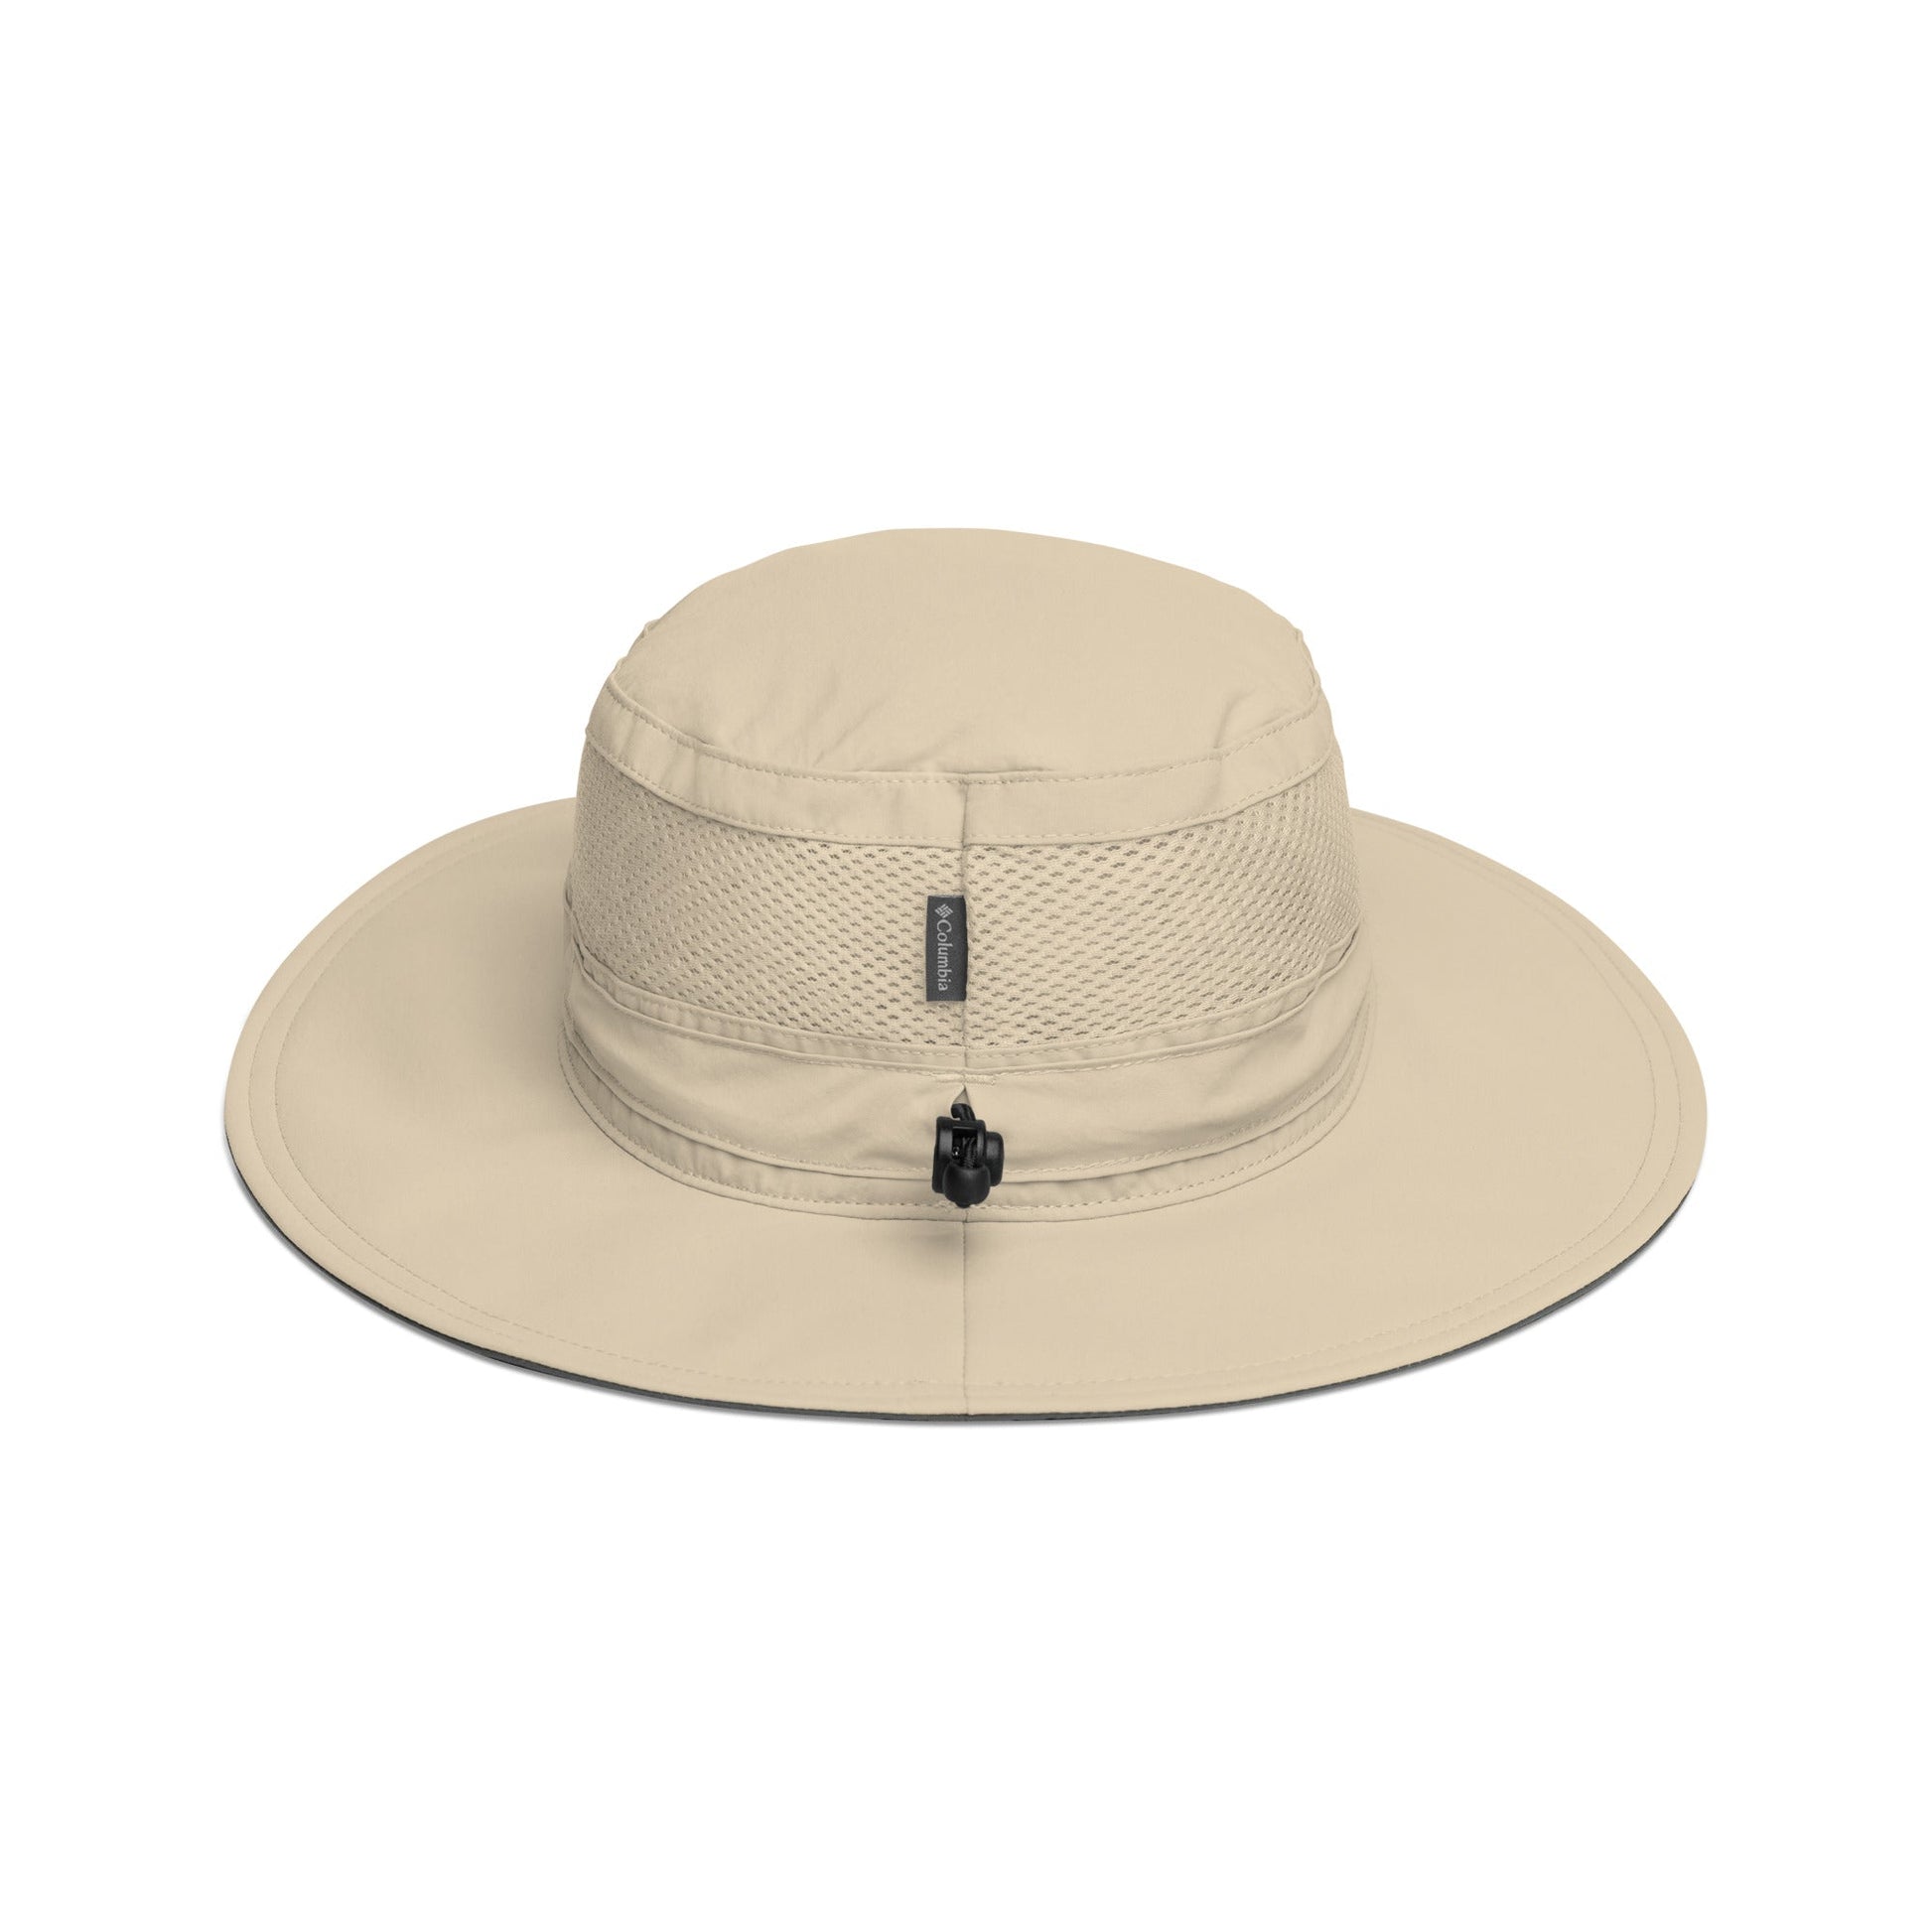 Kennedy Classic Embroidered Columbia Booney Hat - TEAM KENNEDY. All rights reserved